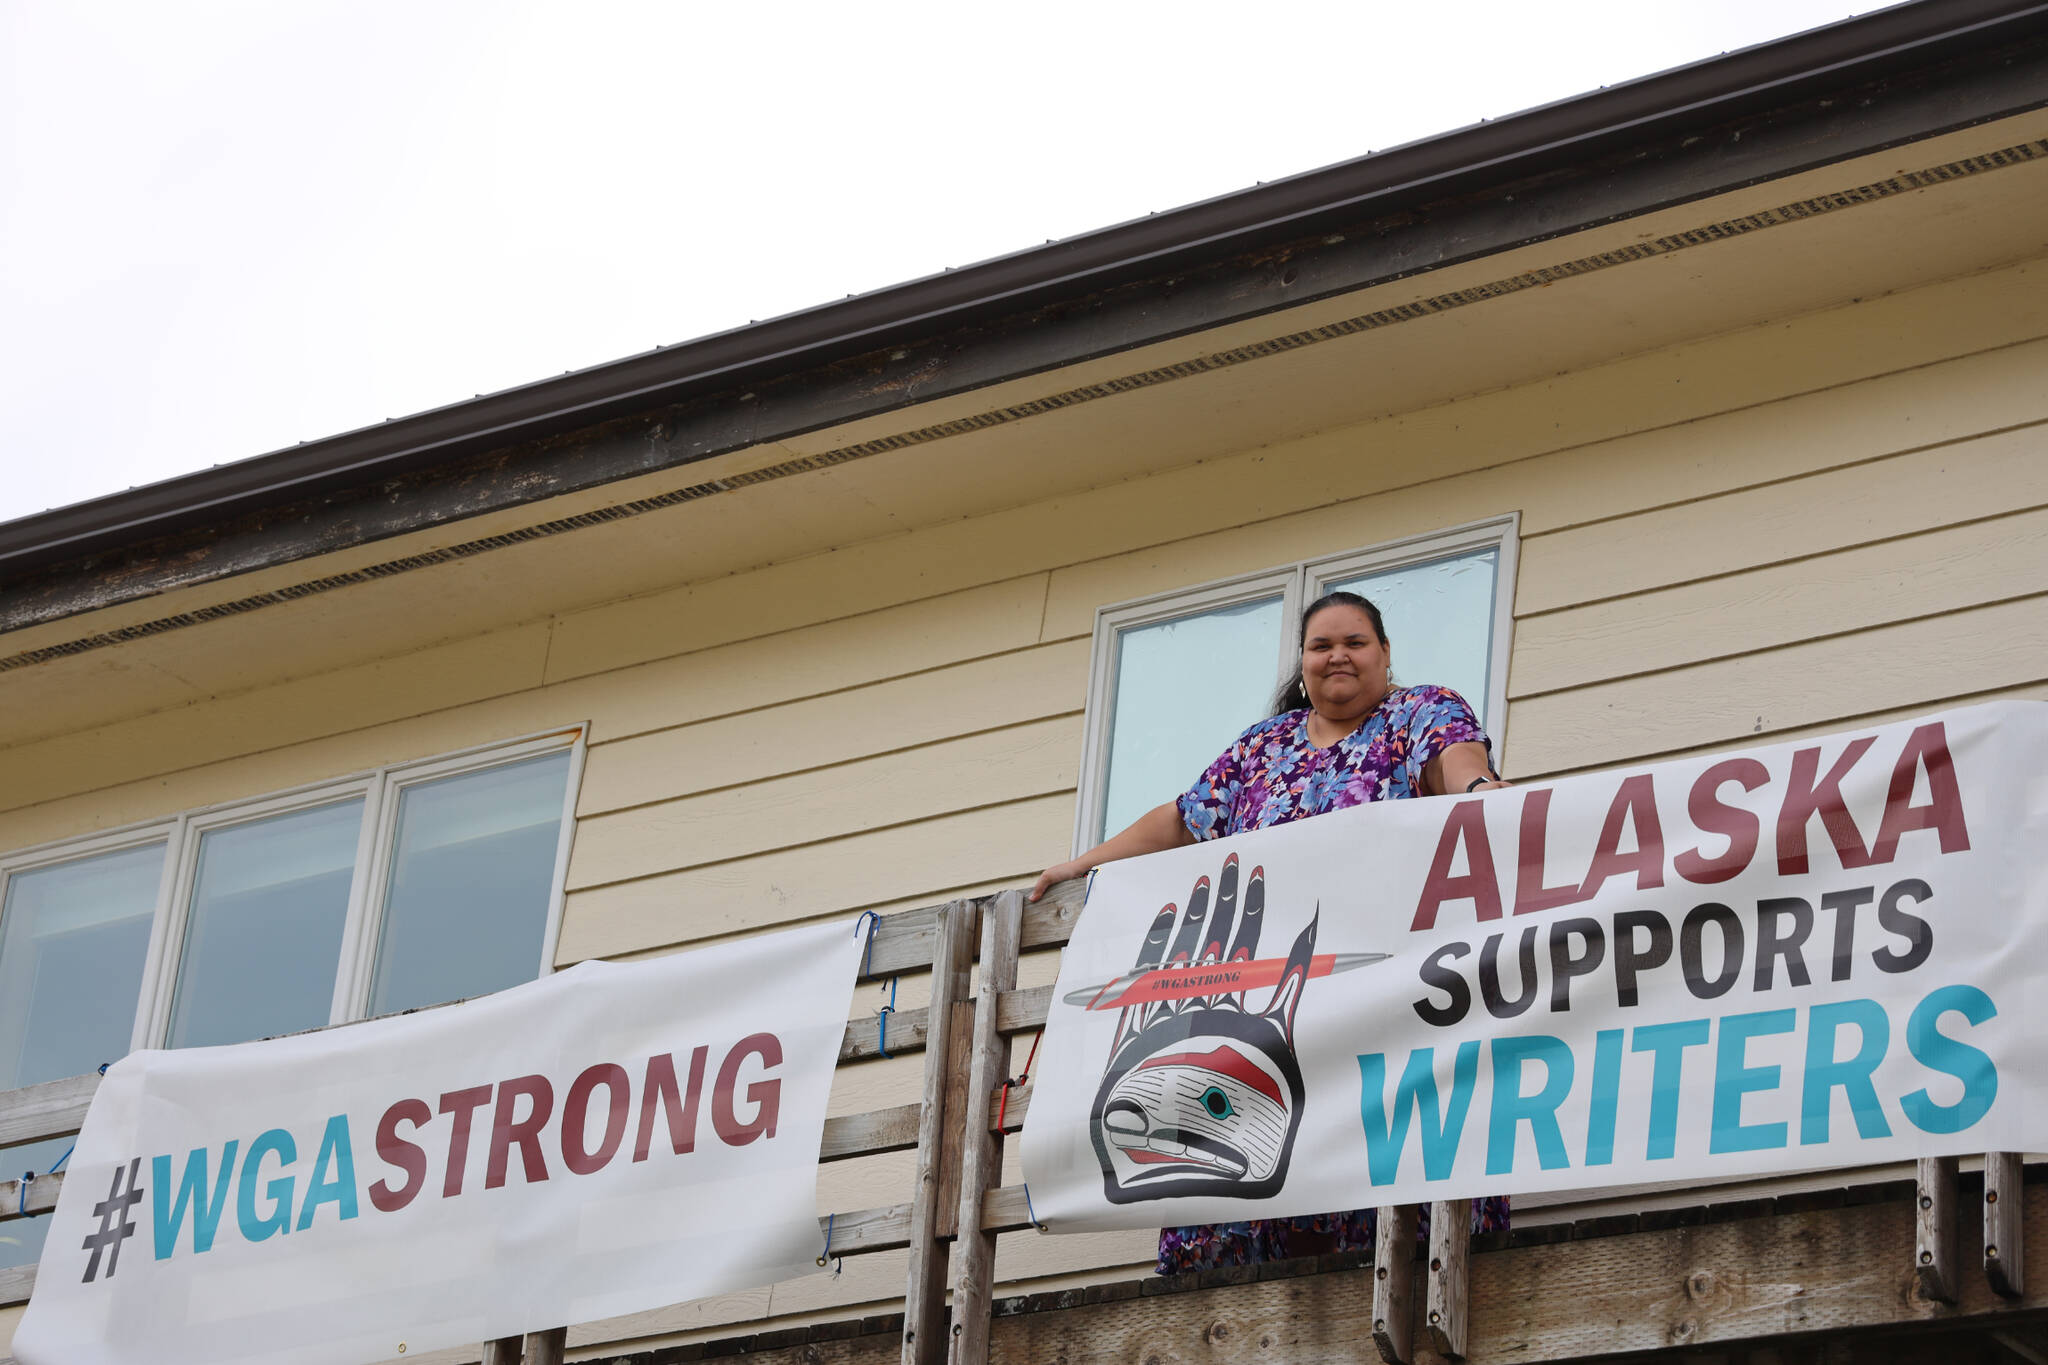 Award-winning Juneau writer Vera Starbard stands on her balcony on Douglas Island that displays banners across Gastineau Channel in support of the Writer’s Guild of America union strike currently going on across Hollywood and the country. (Clarise Larson / Juneau Empire)